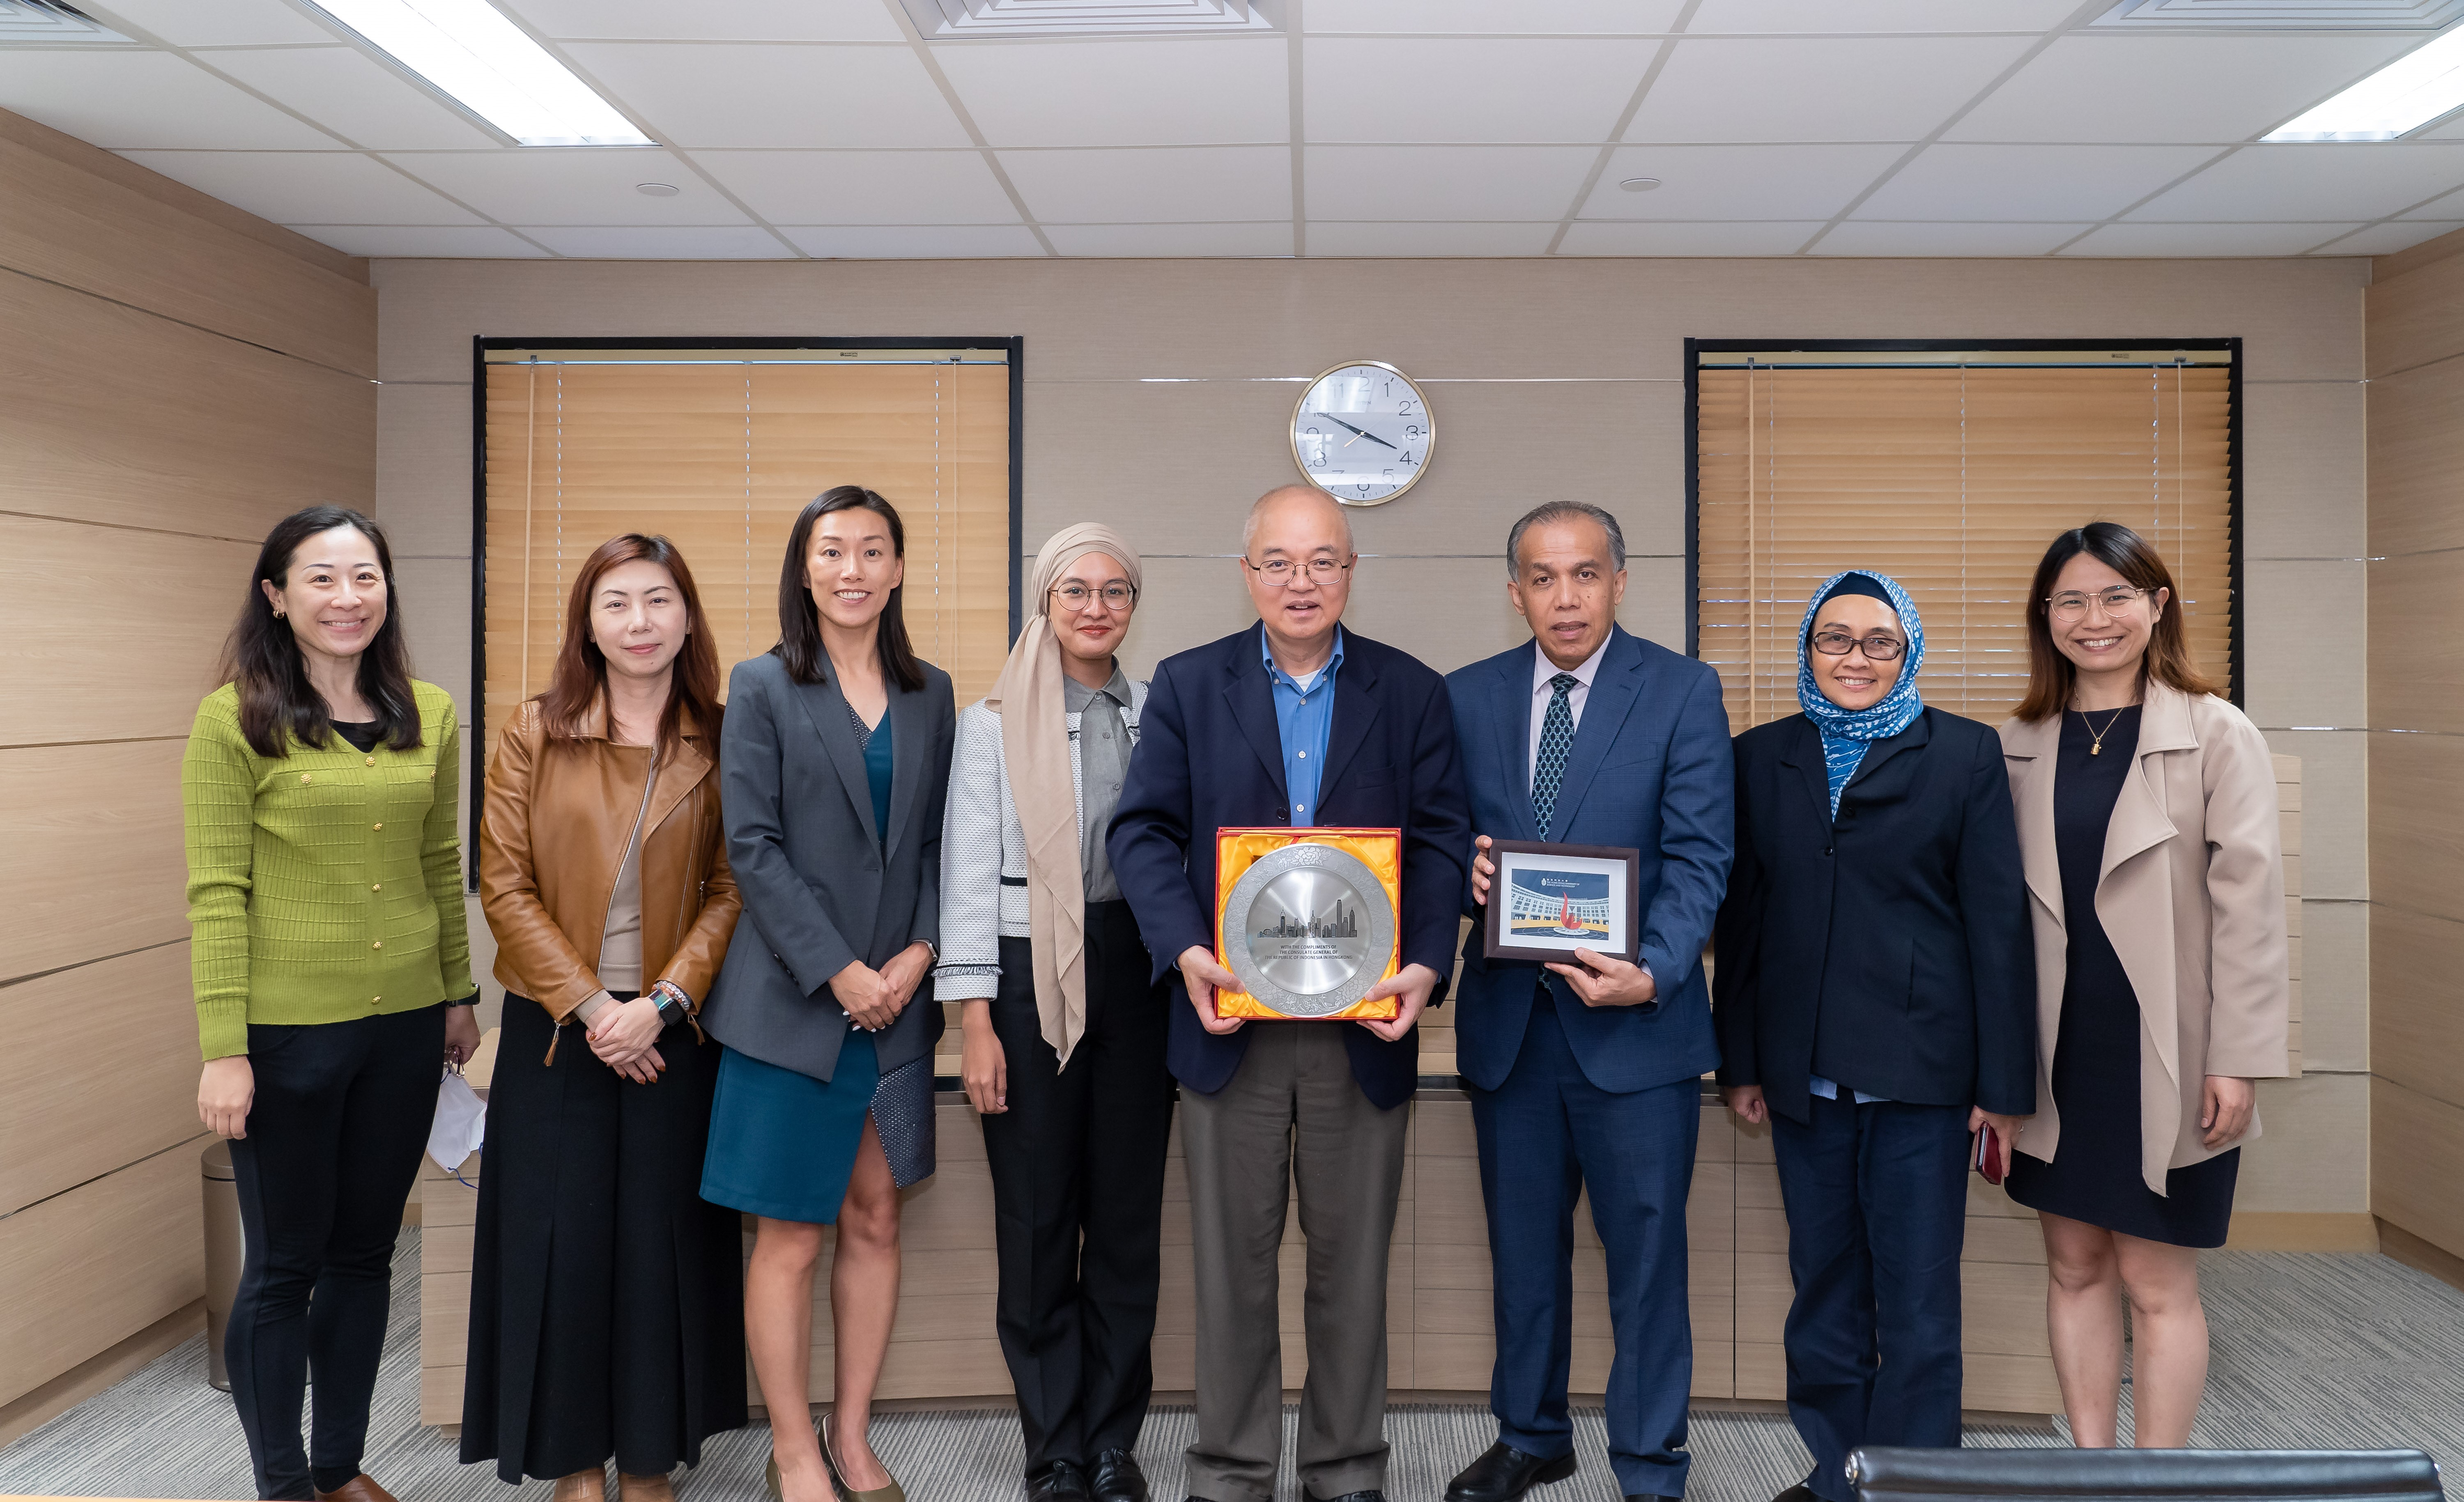 HKUST Vice President for Institutional Advancement Prof. WANG Yang (forth right) exchanges souvenior with Consul General Yul EDISON (third right) of the Republic of Indonesia.